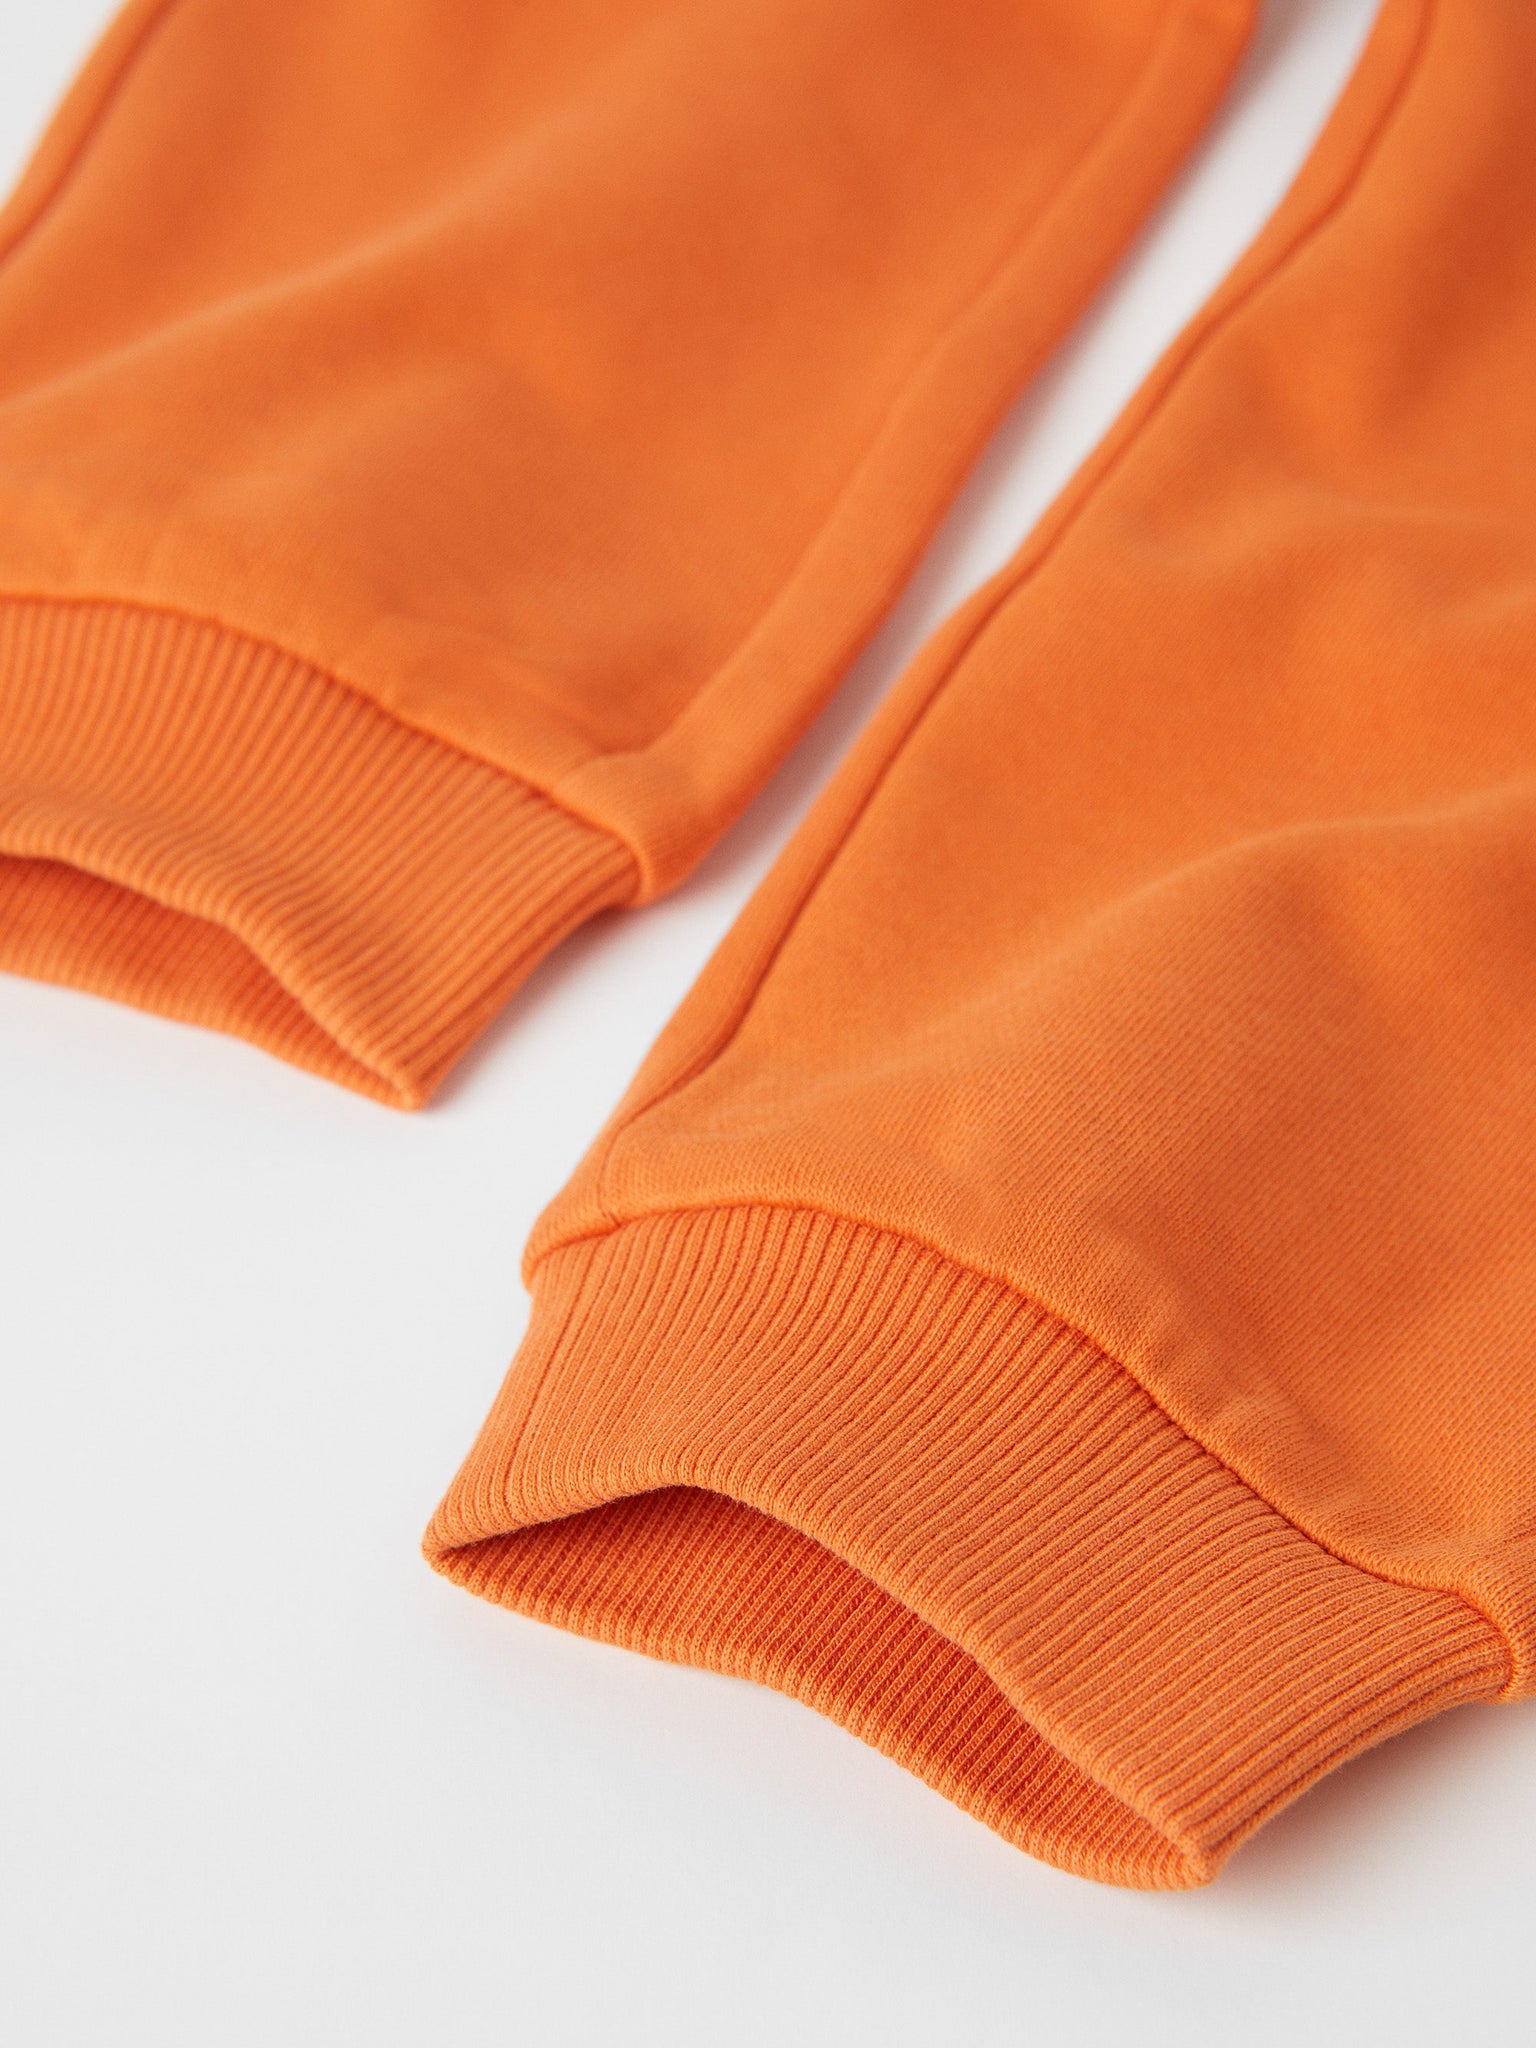 Organic Cotton Orange Kids Joggers from the Polarn O. Pyret kidswear collection. Made using 100% GOTS Organic Cotton